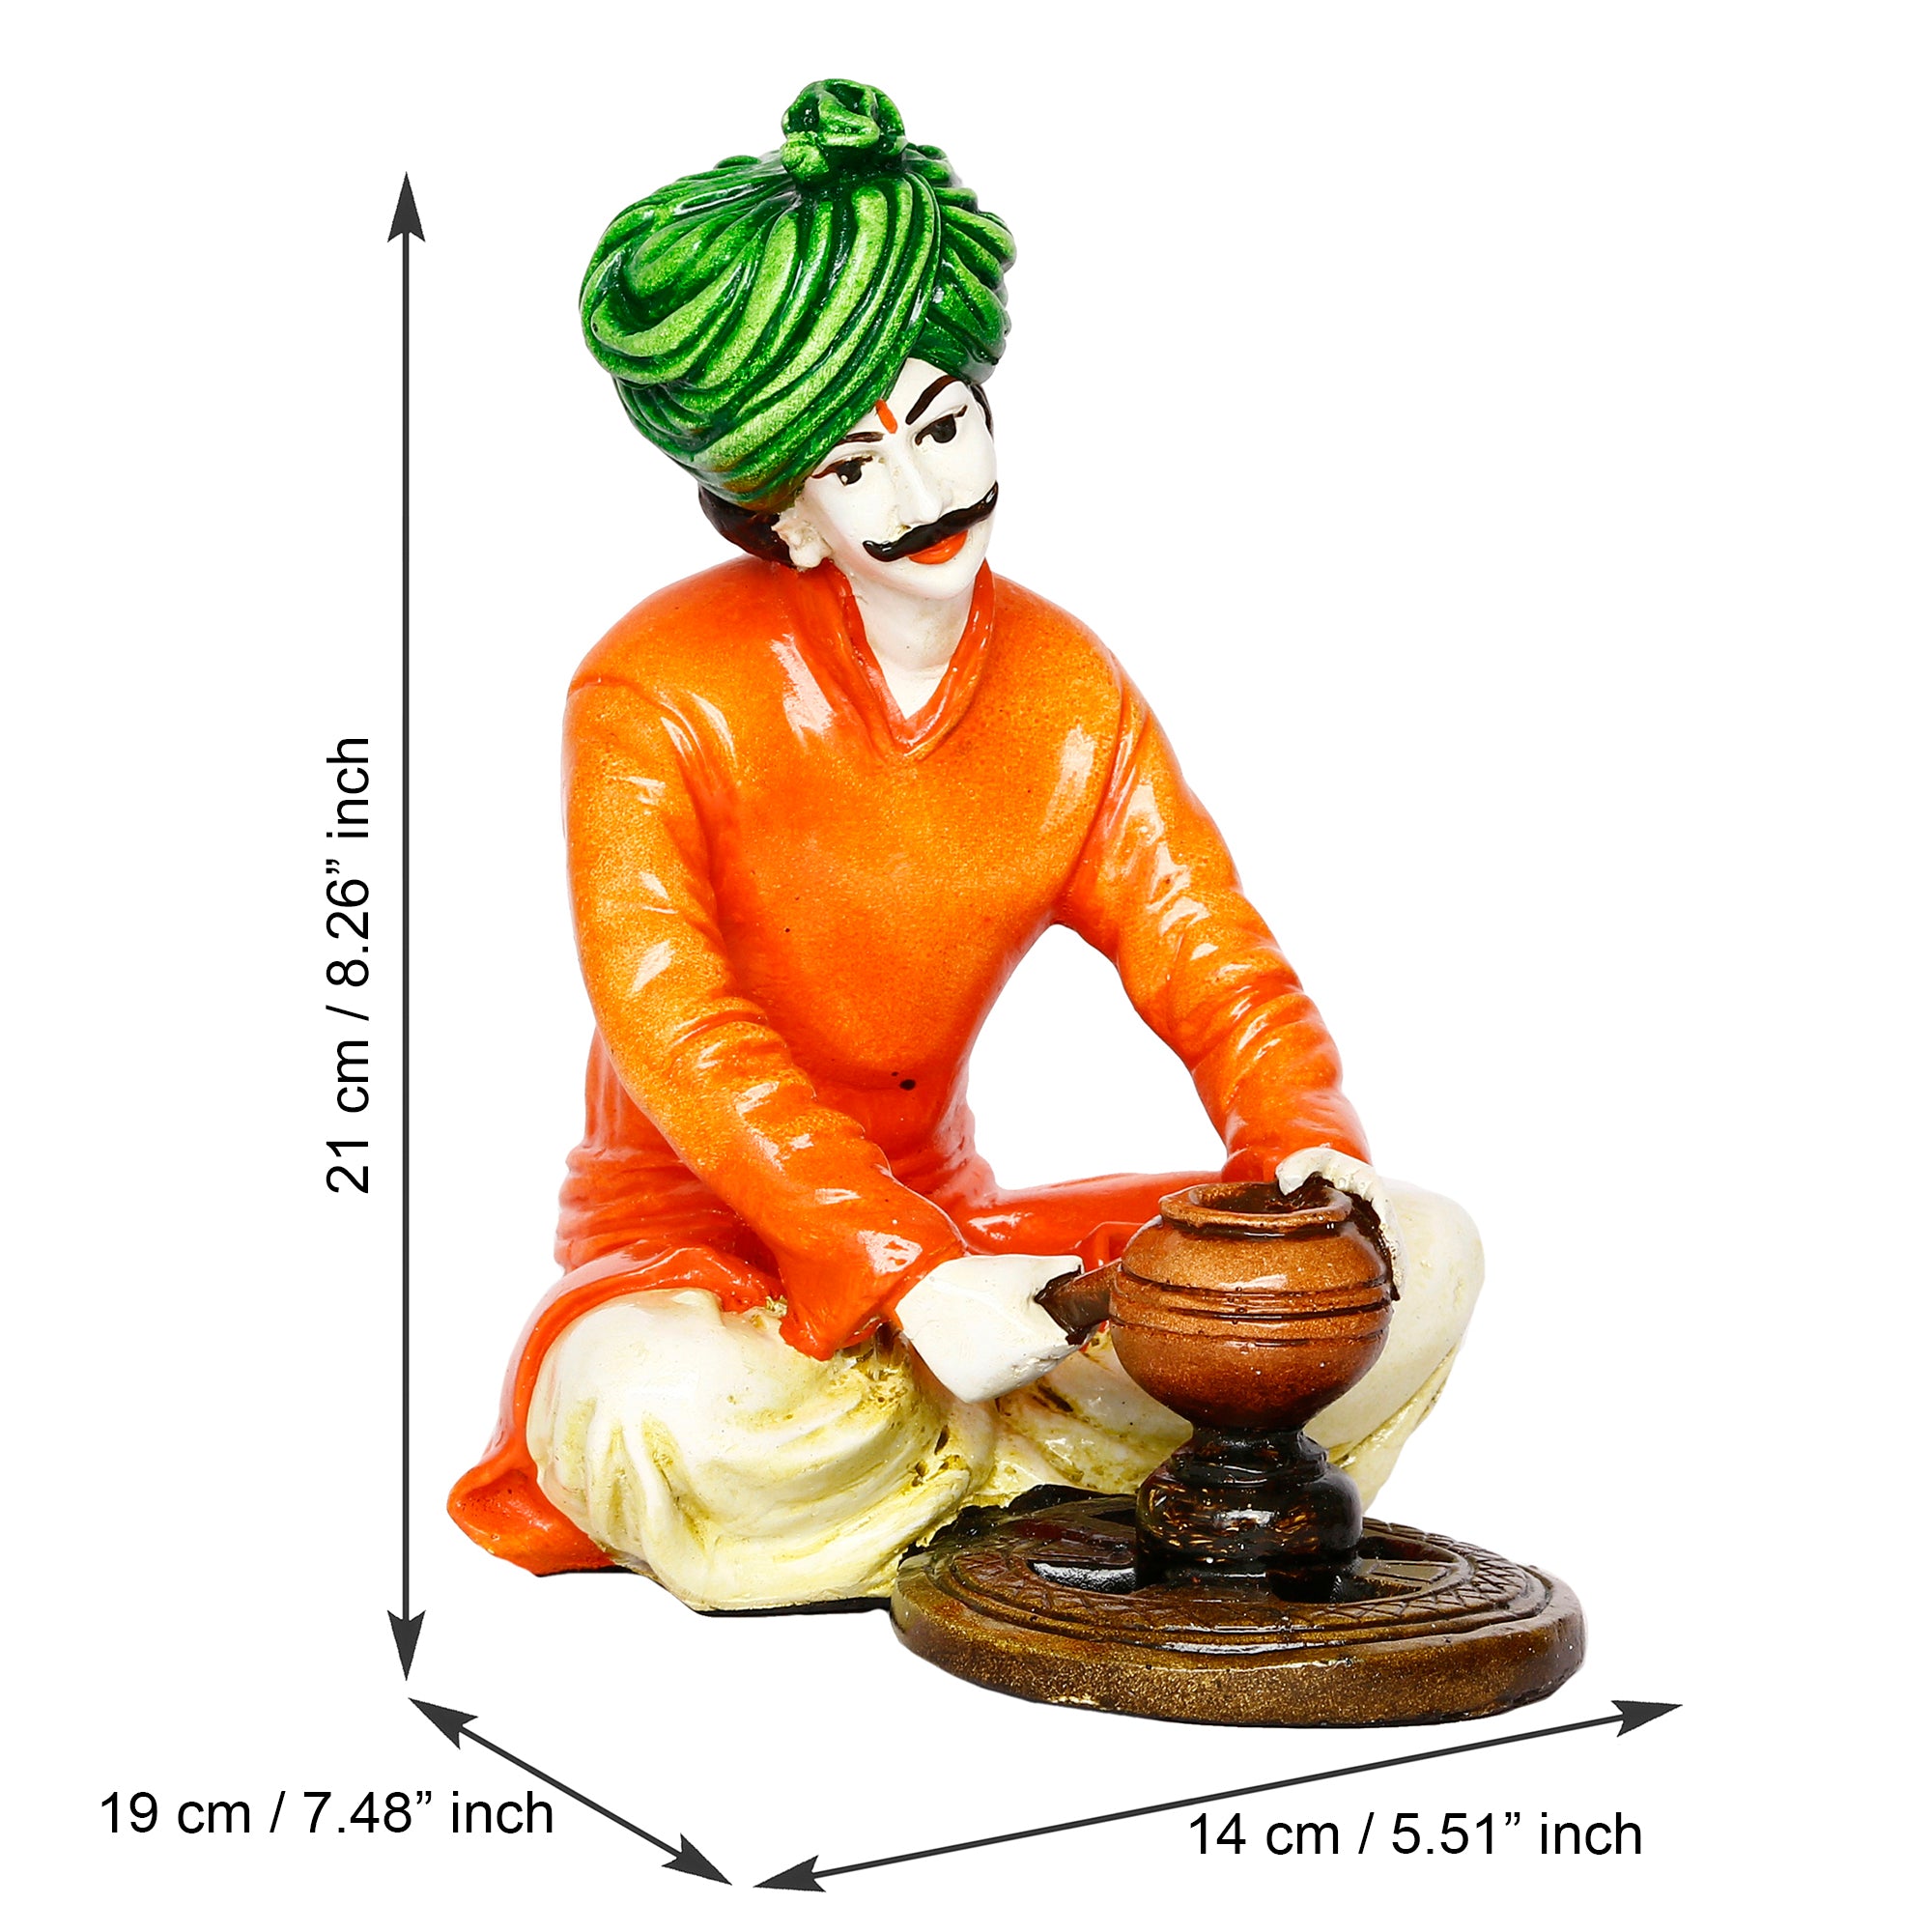 Colorful Rajasthani Man Making Pot Handcrafted Decorative Polyresin Showpiece 3